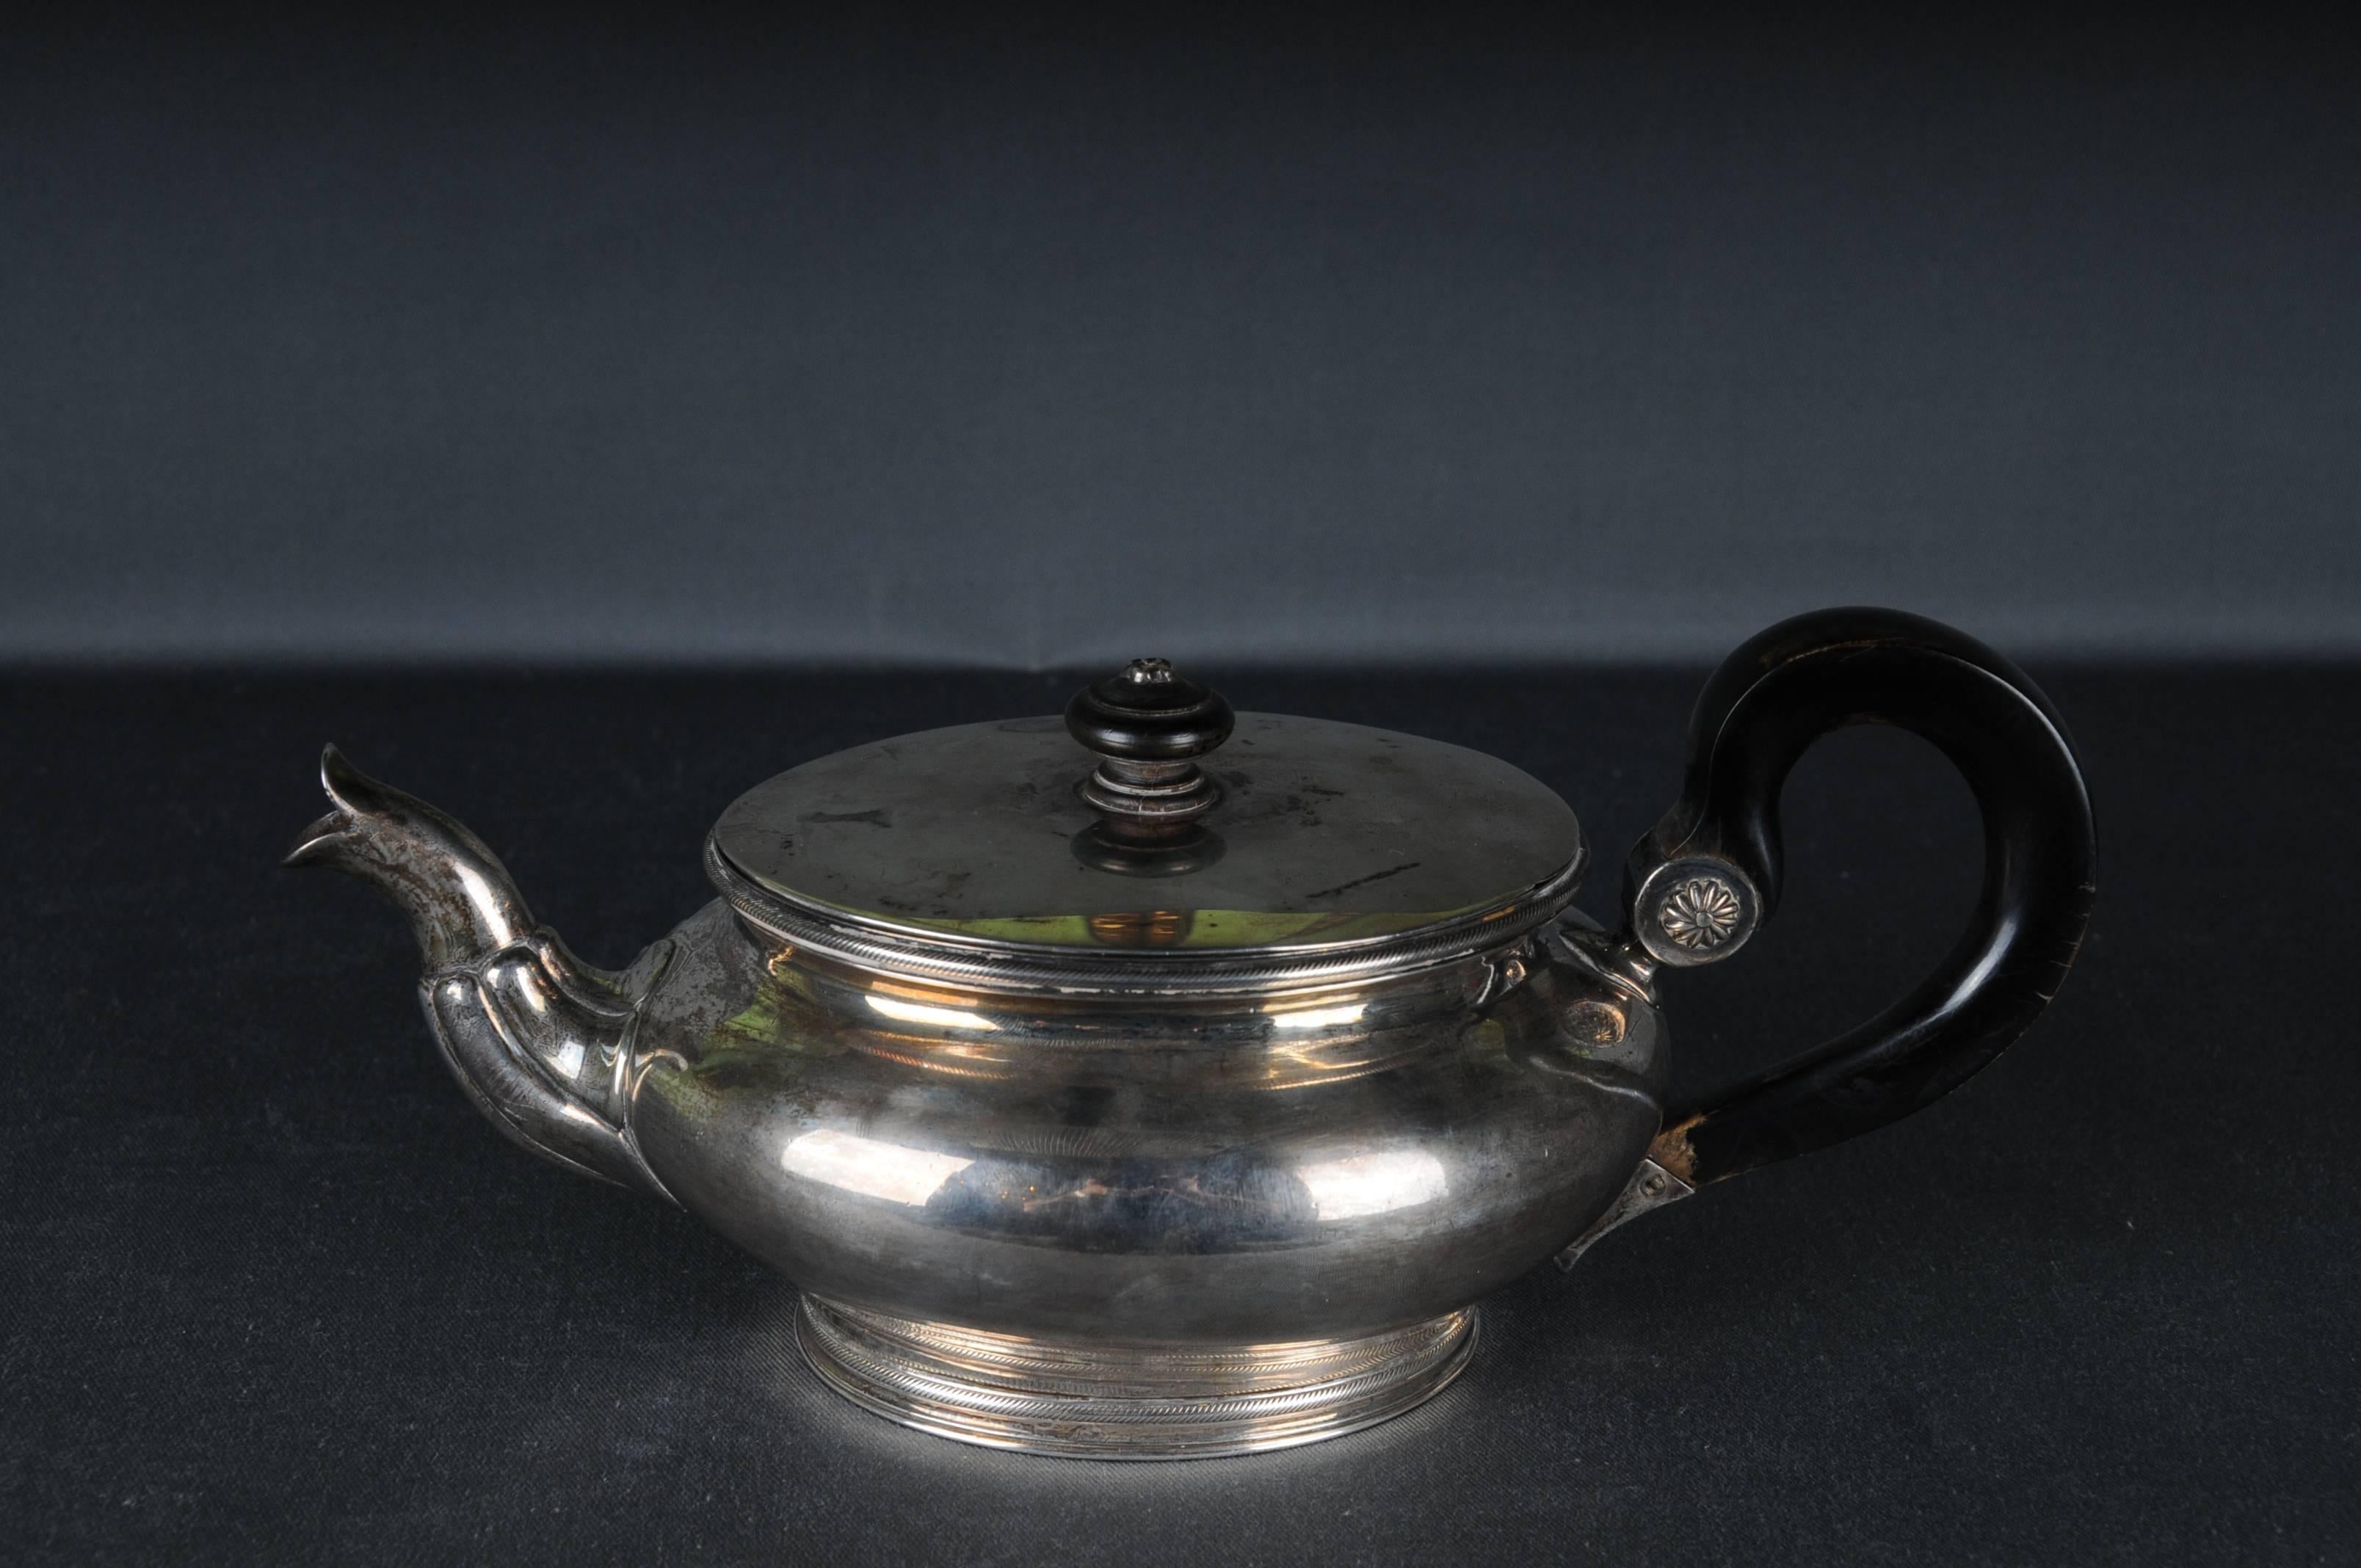 Beautiful Antique Silver England Tea Pot with Wood mount

Weight: 415 g

The condition can be seen in the pictures.